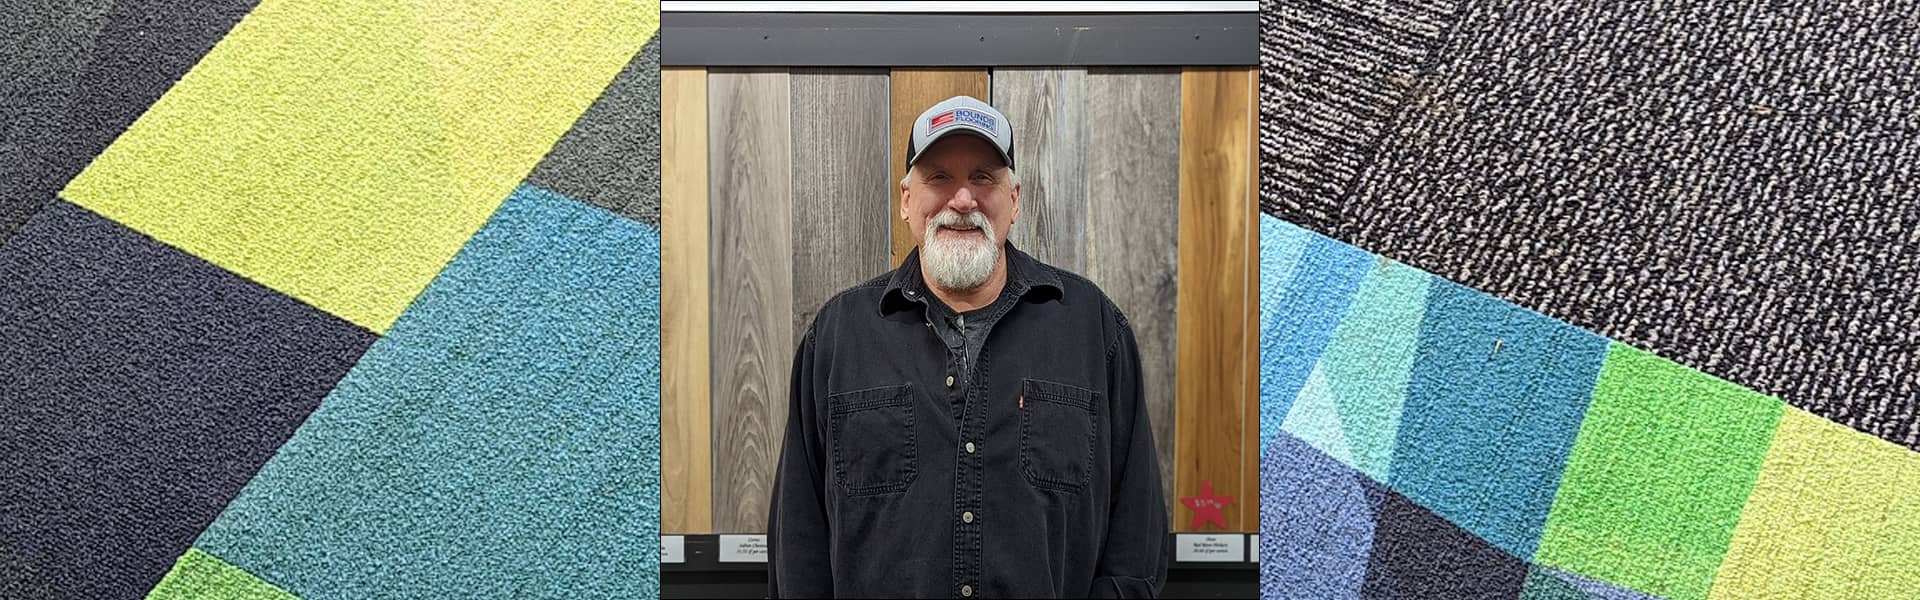 Jerry May, warehouse employee at Bounds Flooring, smiling in front of flooring samples.